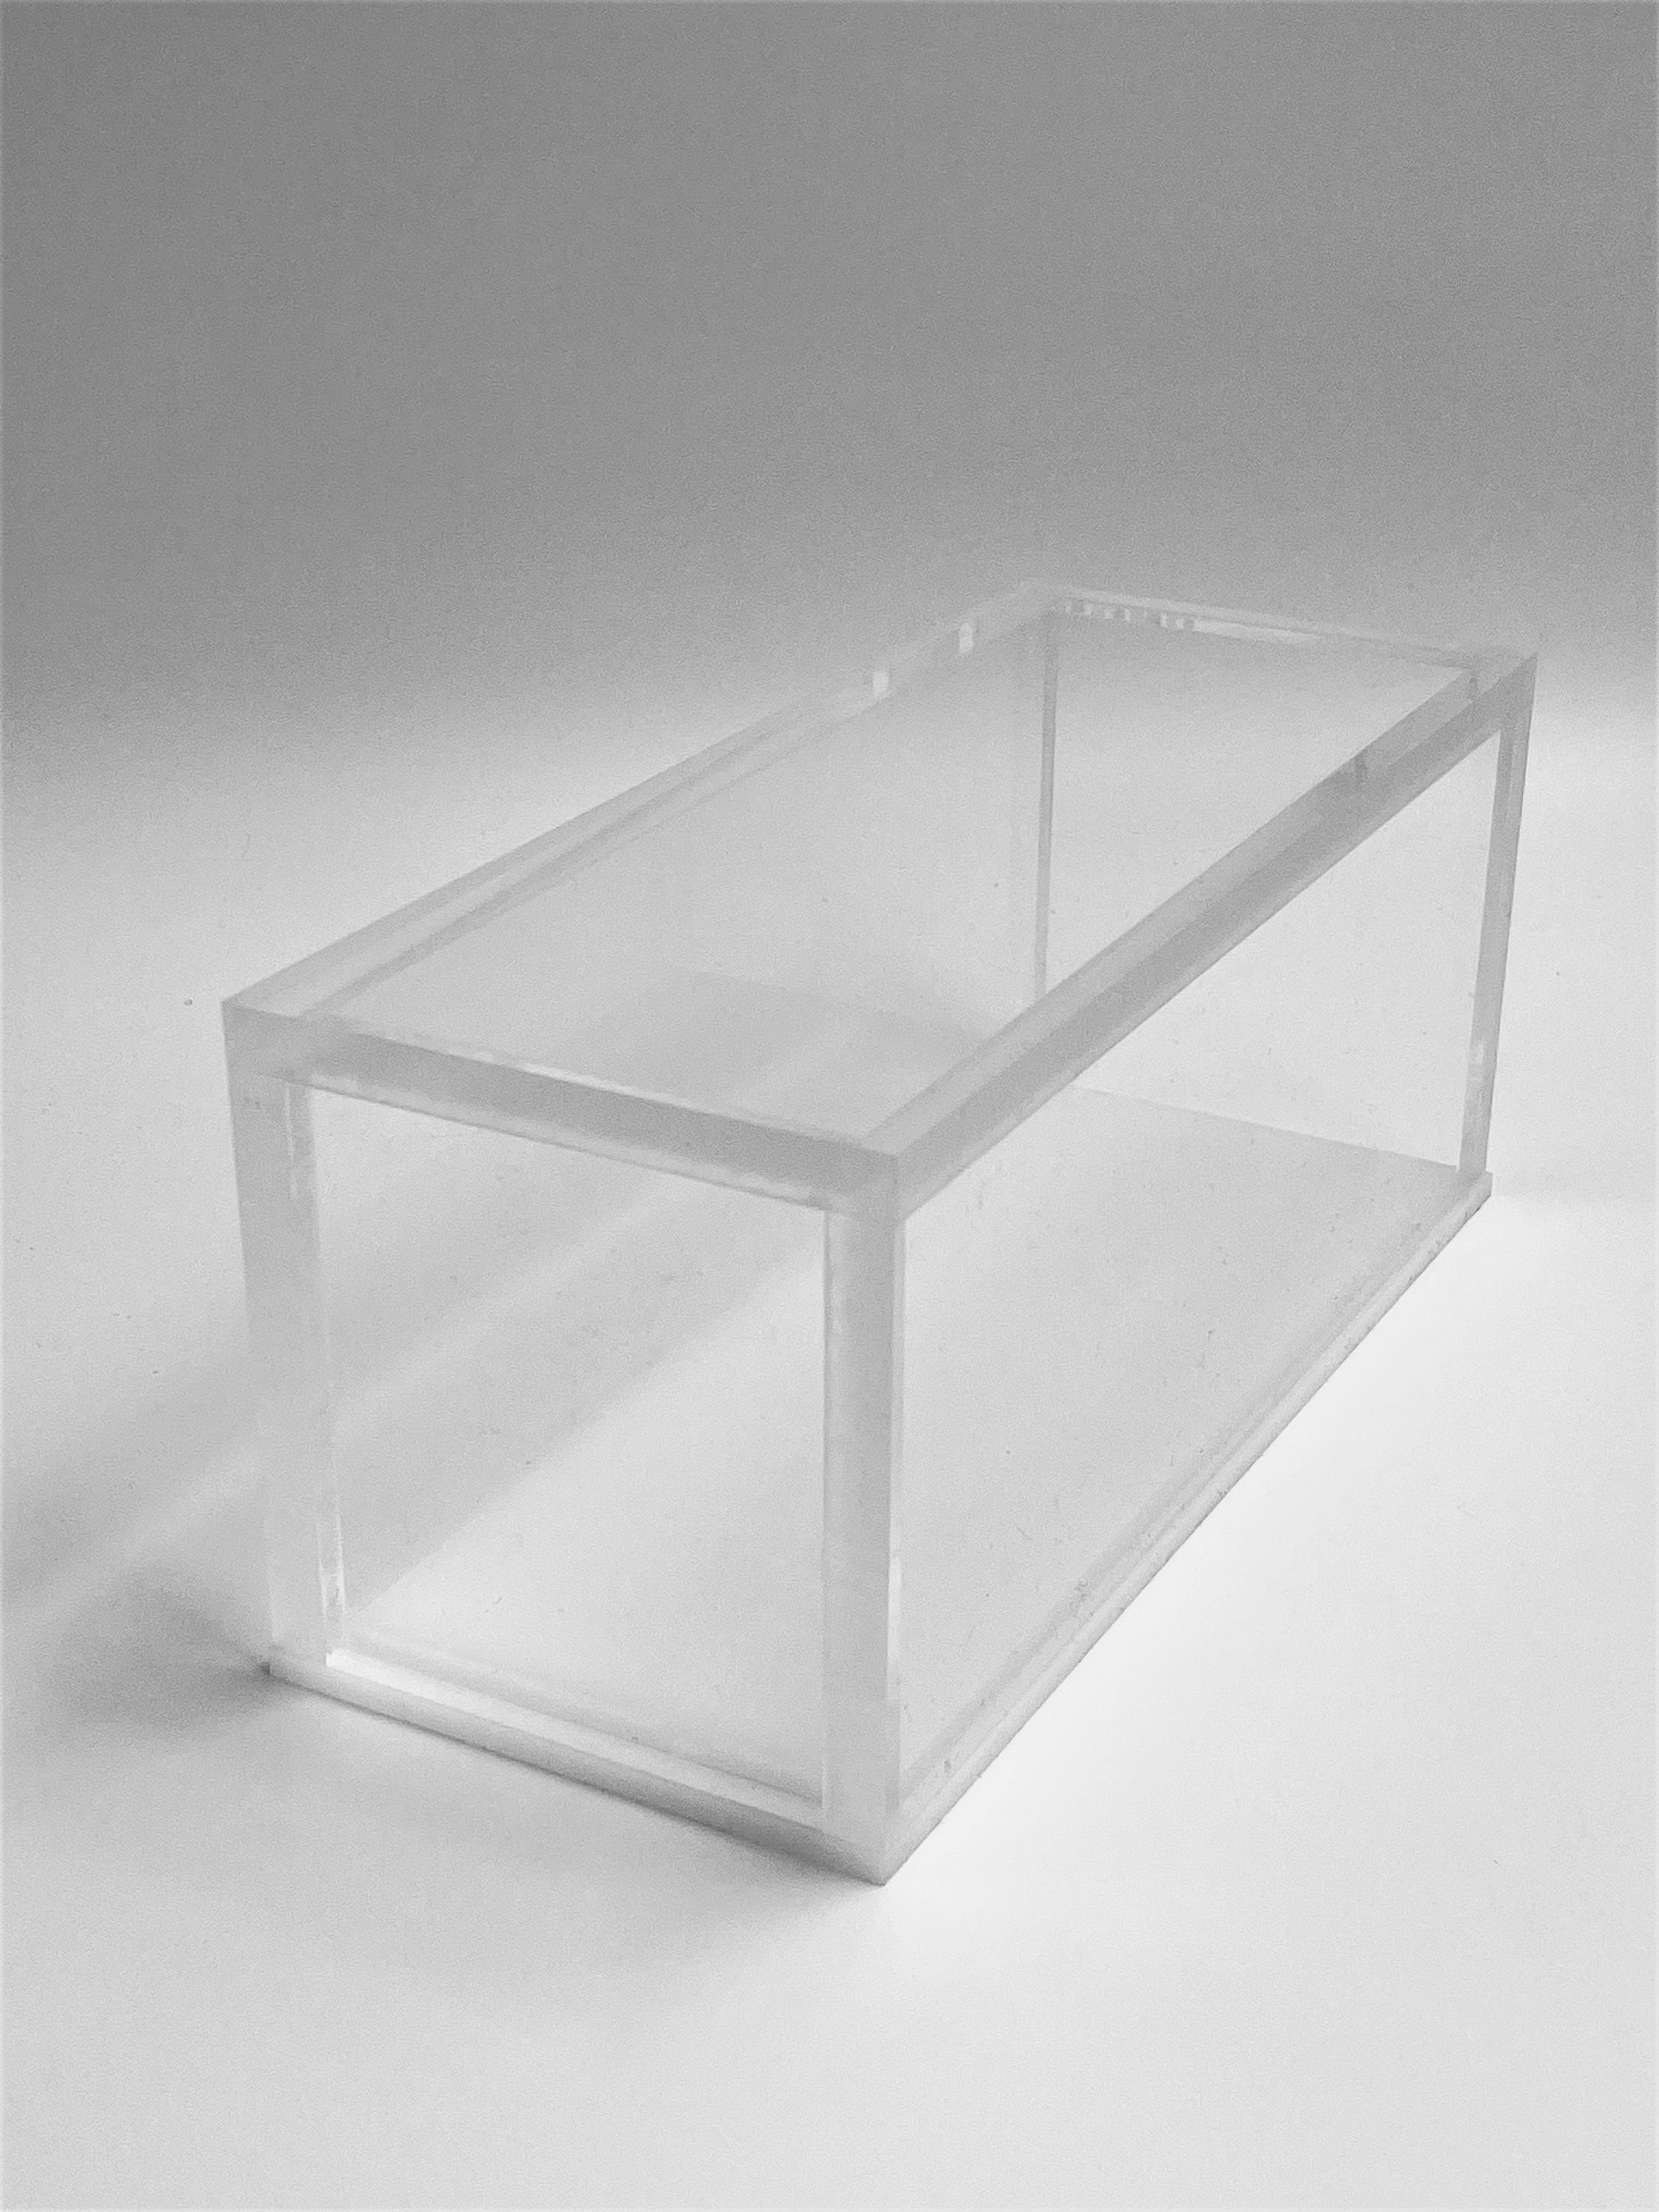 Plexiglass box: 1-opening for access to the condensation section of the